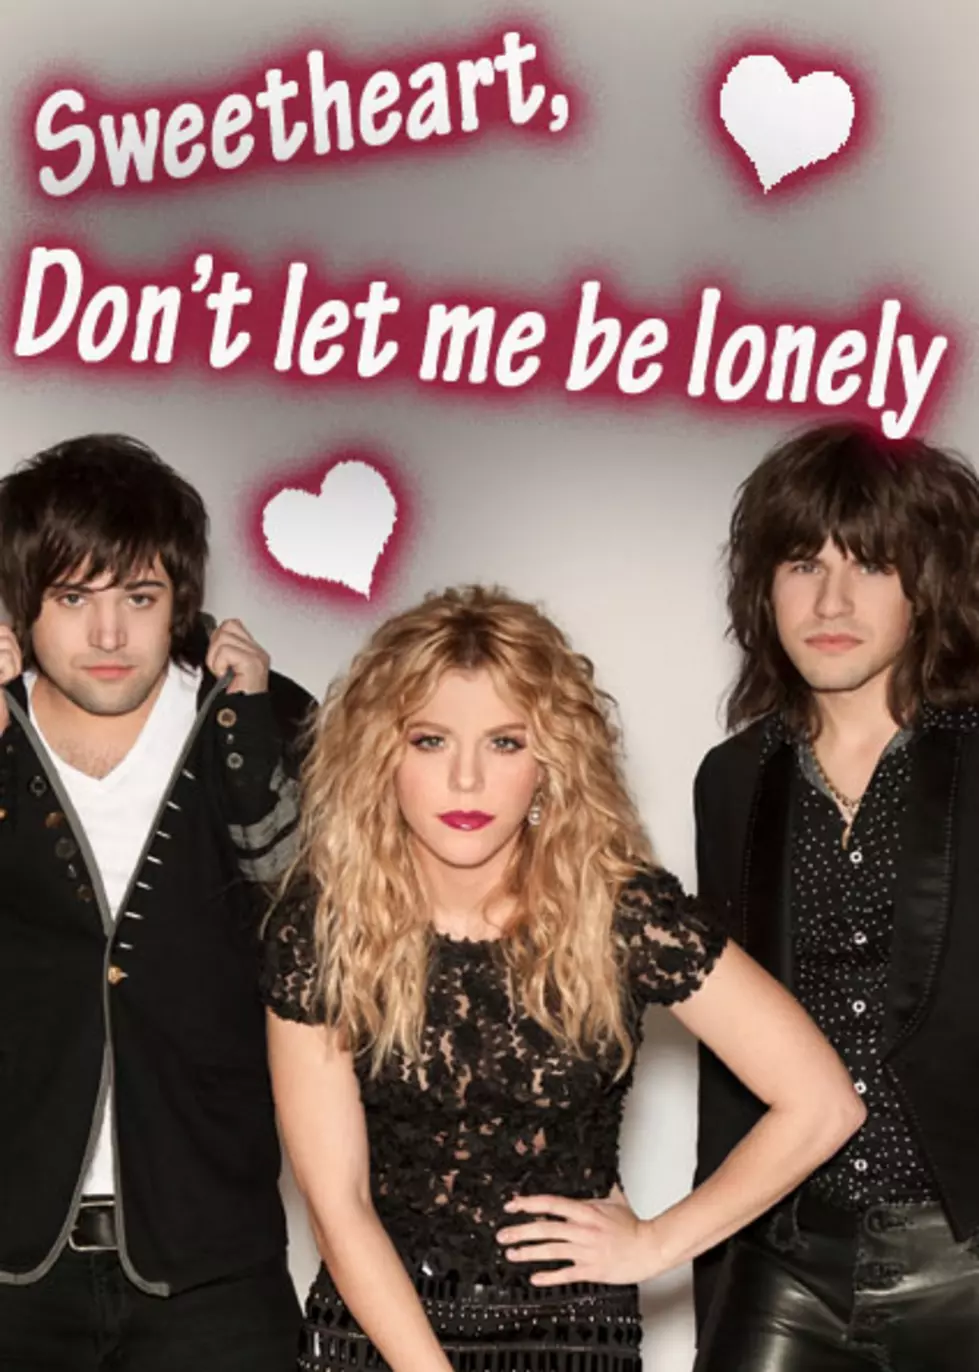 Check Out Check Out The Band Perry’s Valentine’s Day Card